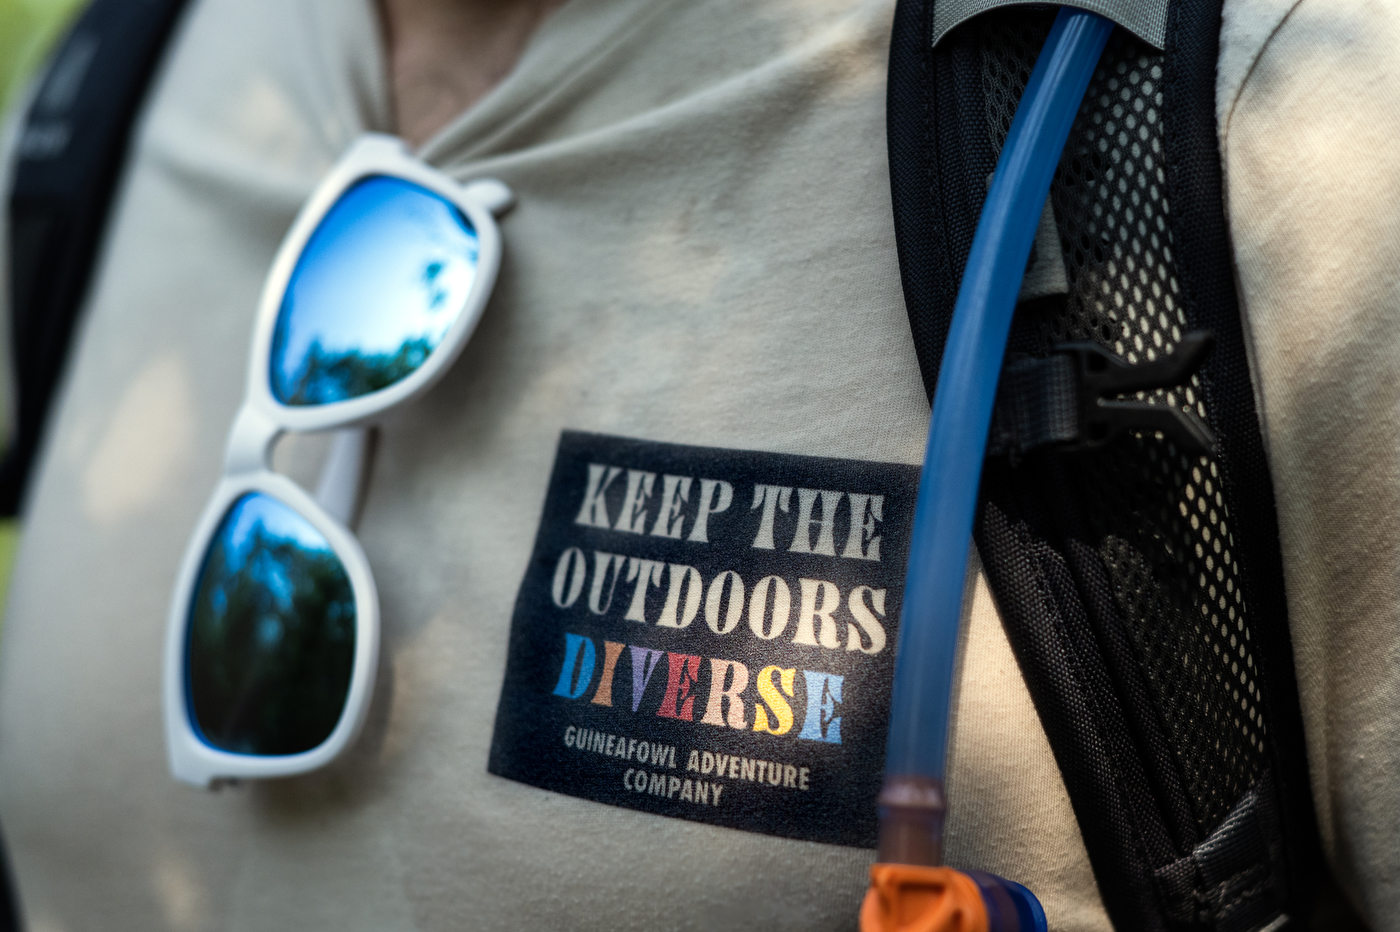 David Fatula wearing a Guineafowl Adventure Company shirt that says "Keep the outdoors diverse" in all caps on it